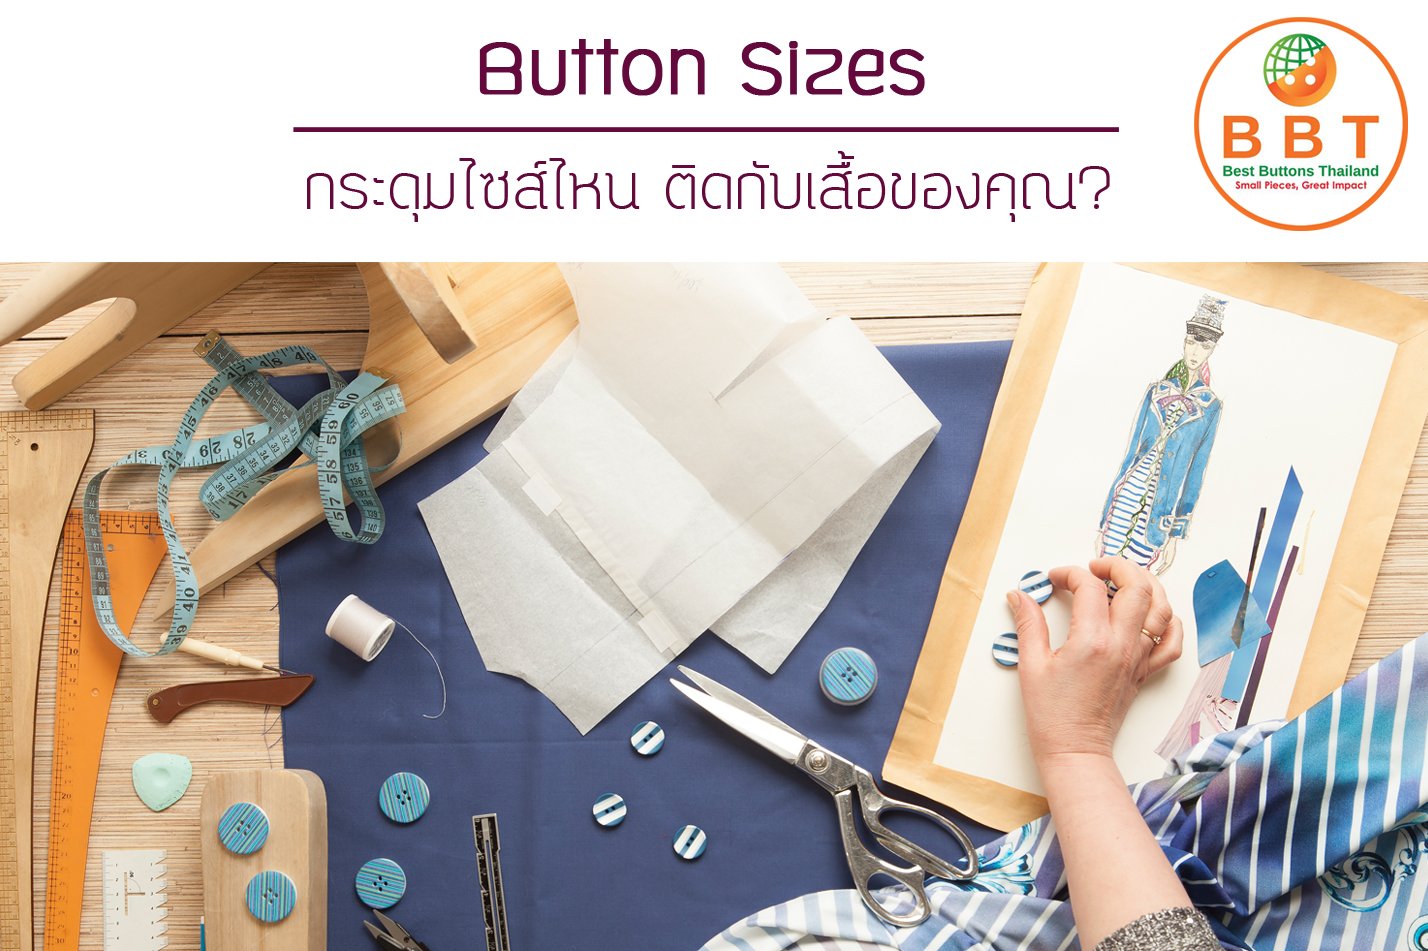 Button Sizes & Usages